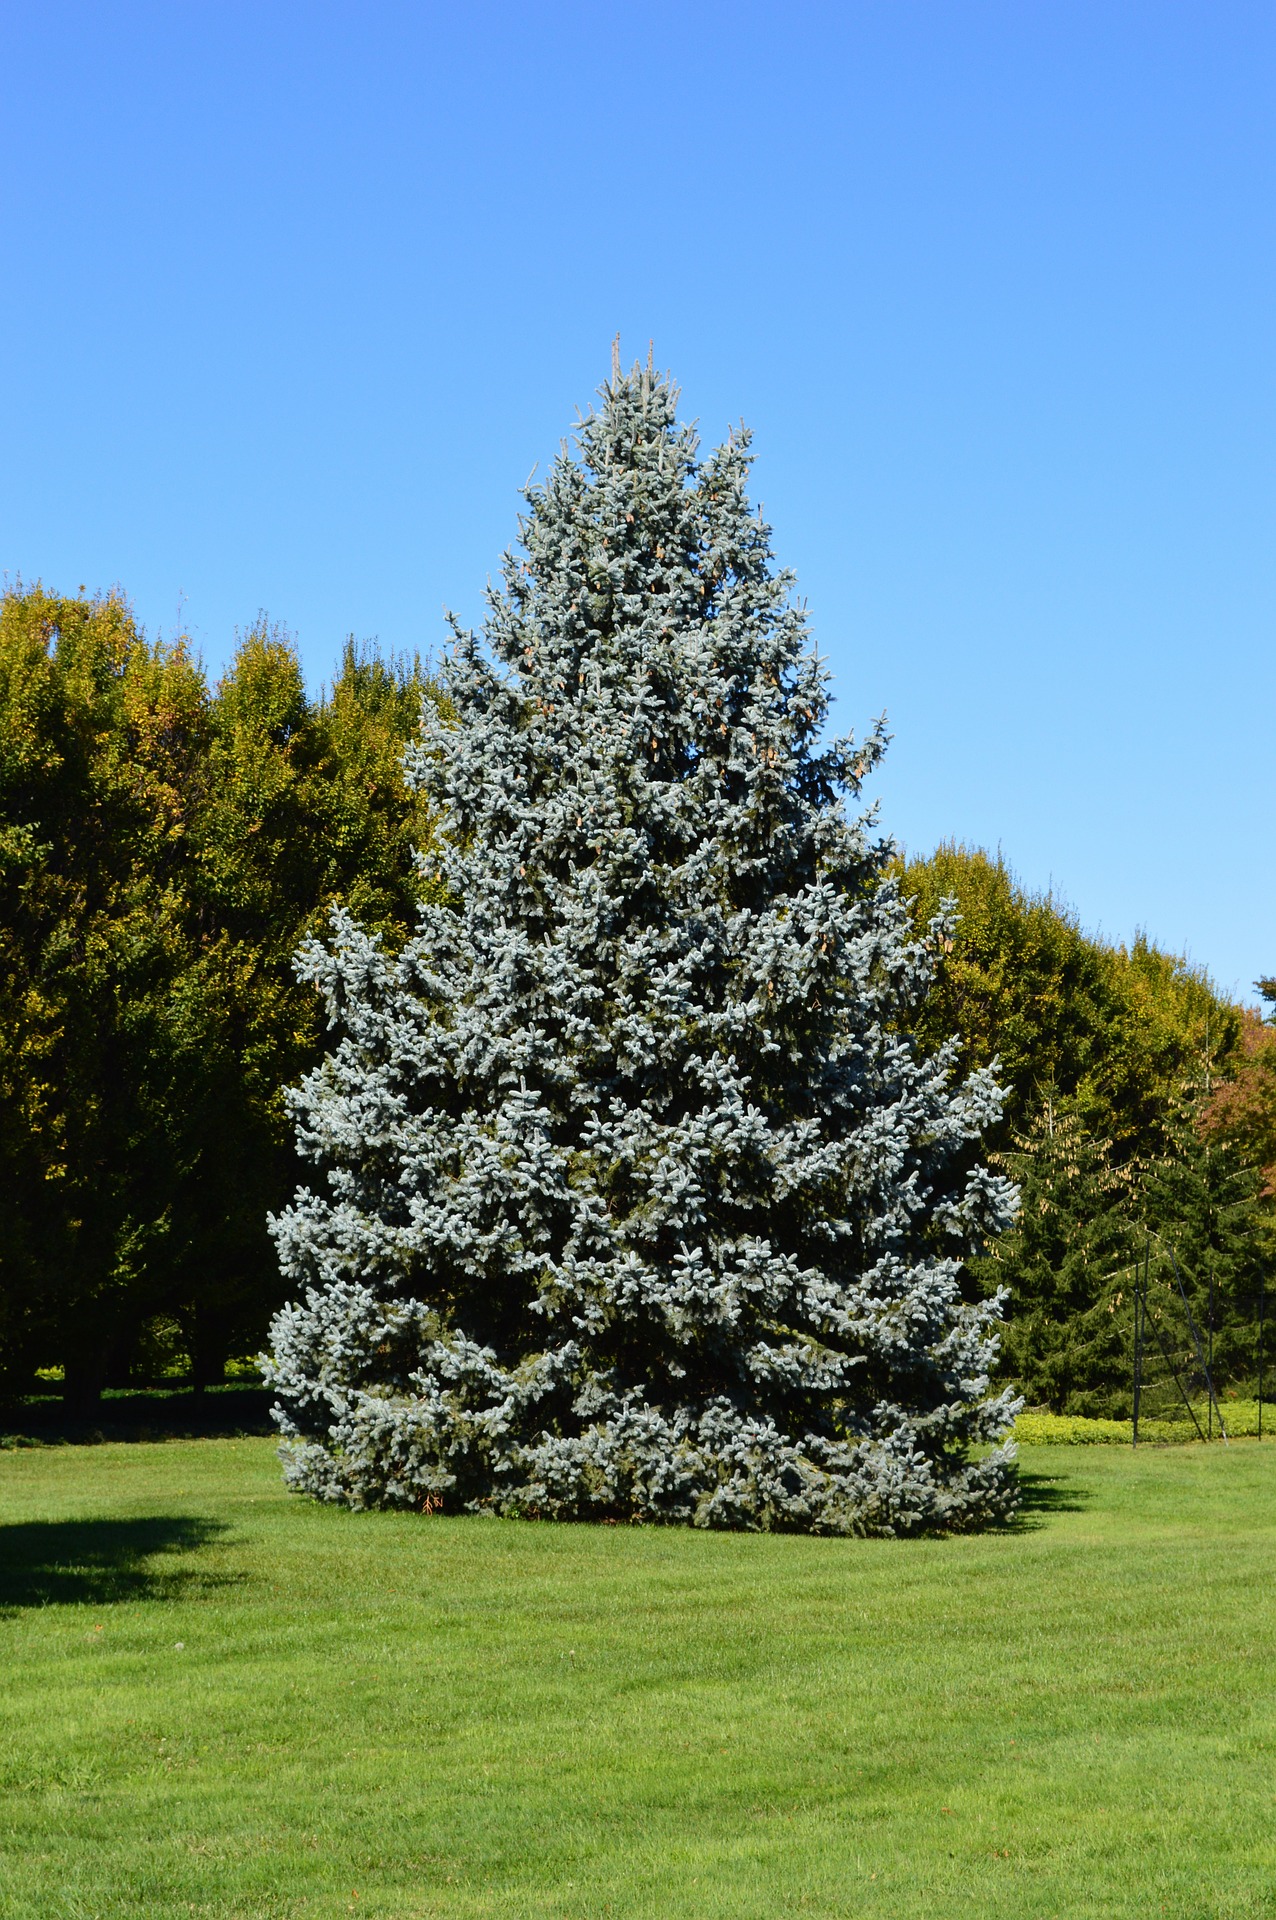 5 trees for screening: Spruces - Sometimes, one tree is enough. You don't need a row or a hedge, just a well-placed large tree to obscure an eyesore from either direction. Spruces fit nicely into that category.Zone: 2-8Size: 40'-60' x 10'-20' (Norway),10'-15 x 10'-15' (smaller blue spruces)Cultivars Suggested: 'Fat Albert', 'Baby Blue Eyes', Norway, OrientalCulture: Full sun, does not like wet feet, good wind screenGrowth rate: SlowPests and Diseases: Needle cast, canker, bagworms*Colorado Blue Spruce pictured